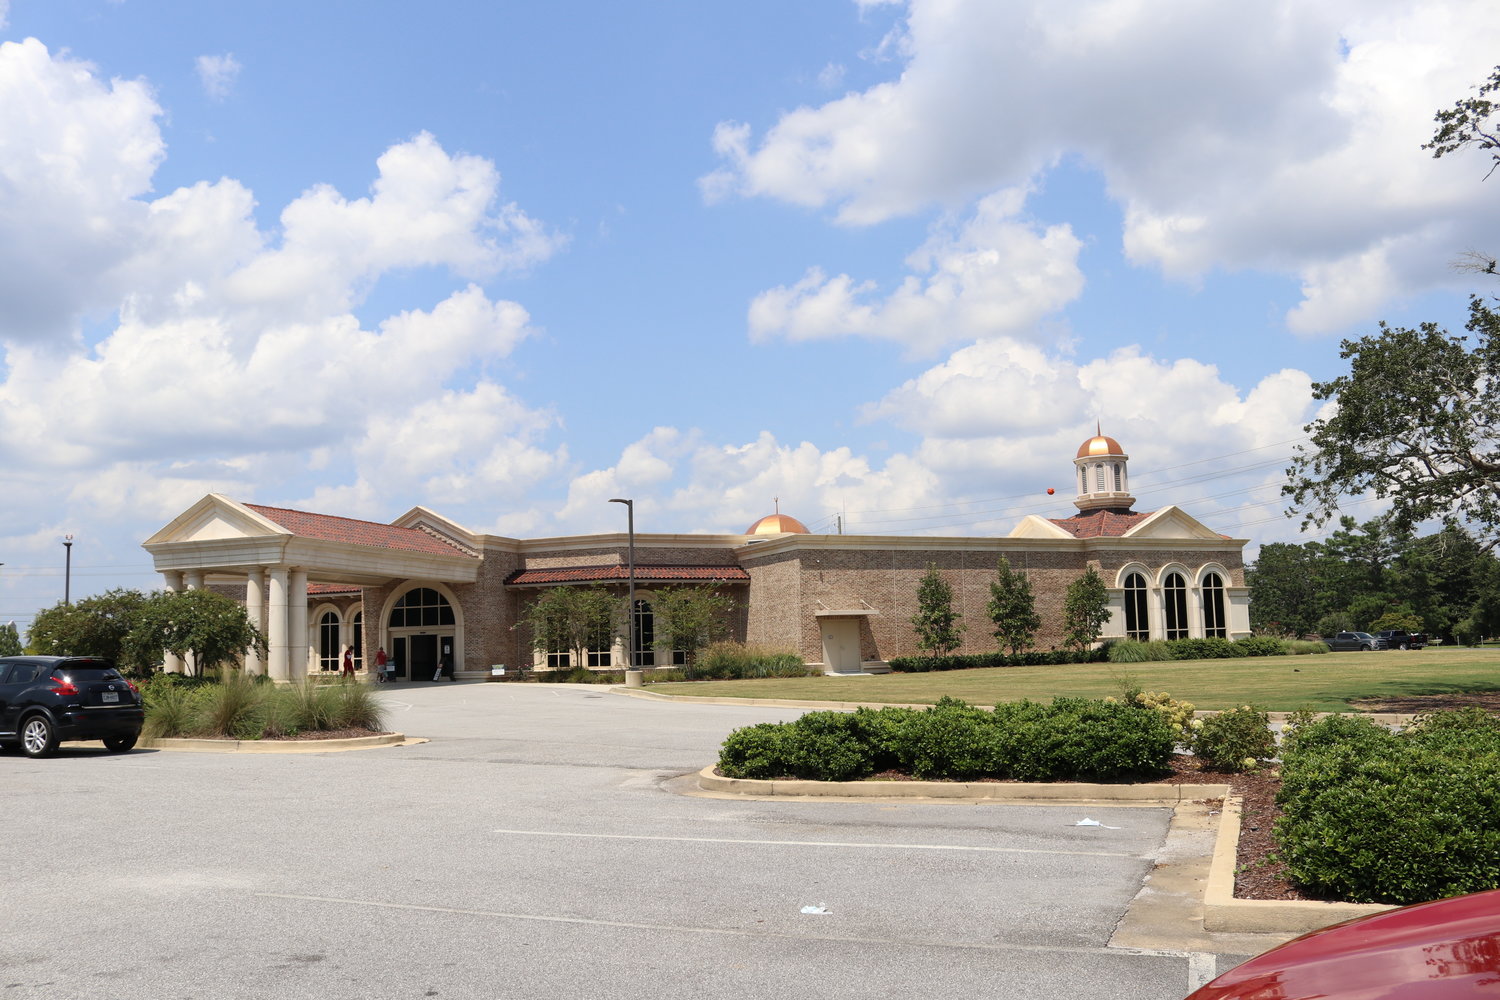 The Thomas Hospital free-standing emergency room, part of Infirmary Health System, is in the area proposed as a medical overlay district in Daphne. Resident told City Council members that the zoning change could affect local property and traffic.